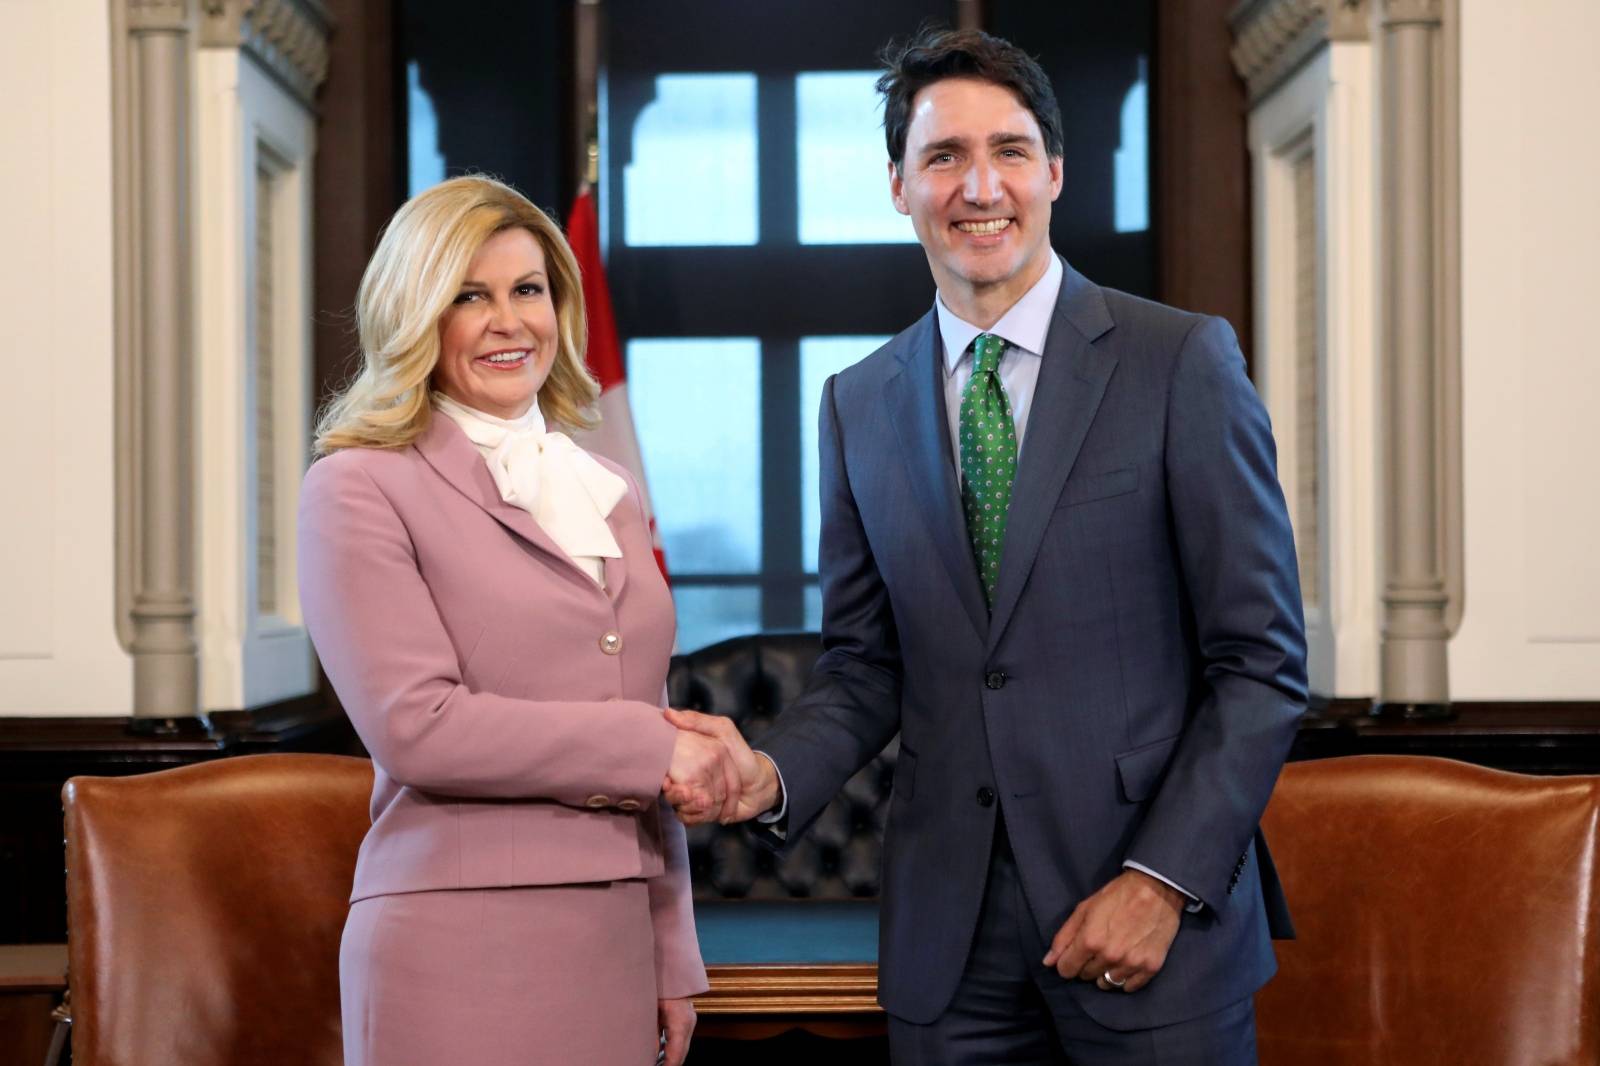 Canada's PM Trudeau shakes hands with Croatia's President Grabar-Kitarovic on Parliament Hill in Ottawa